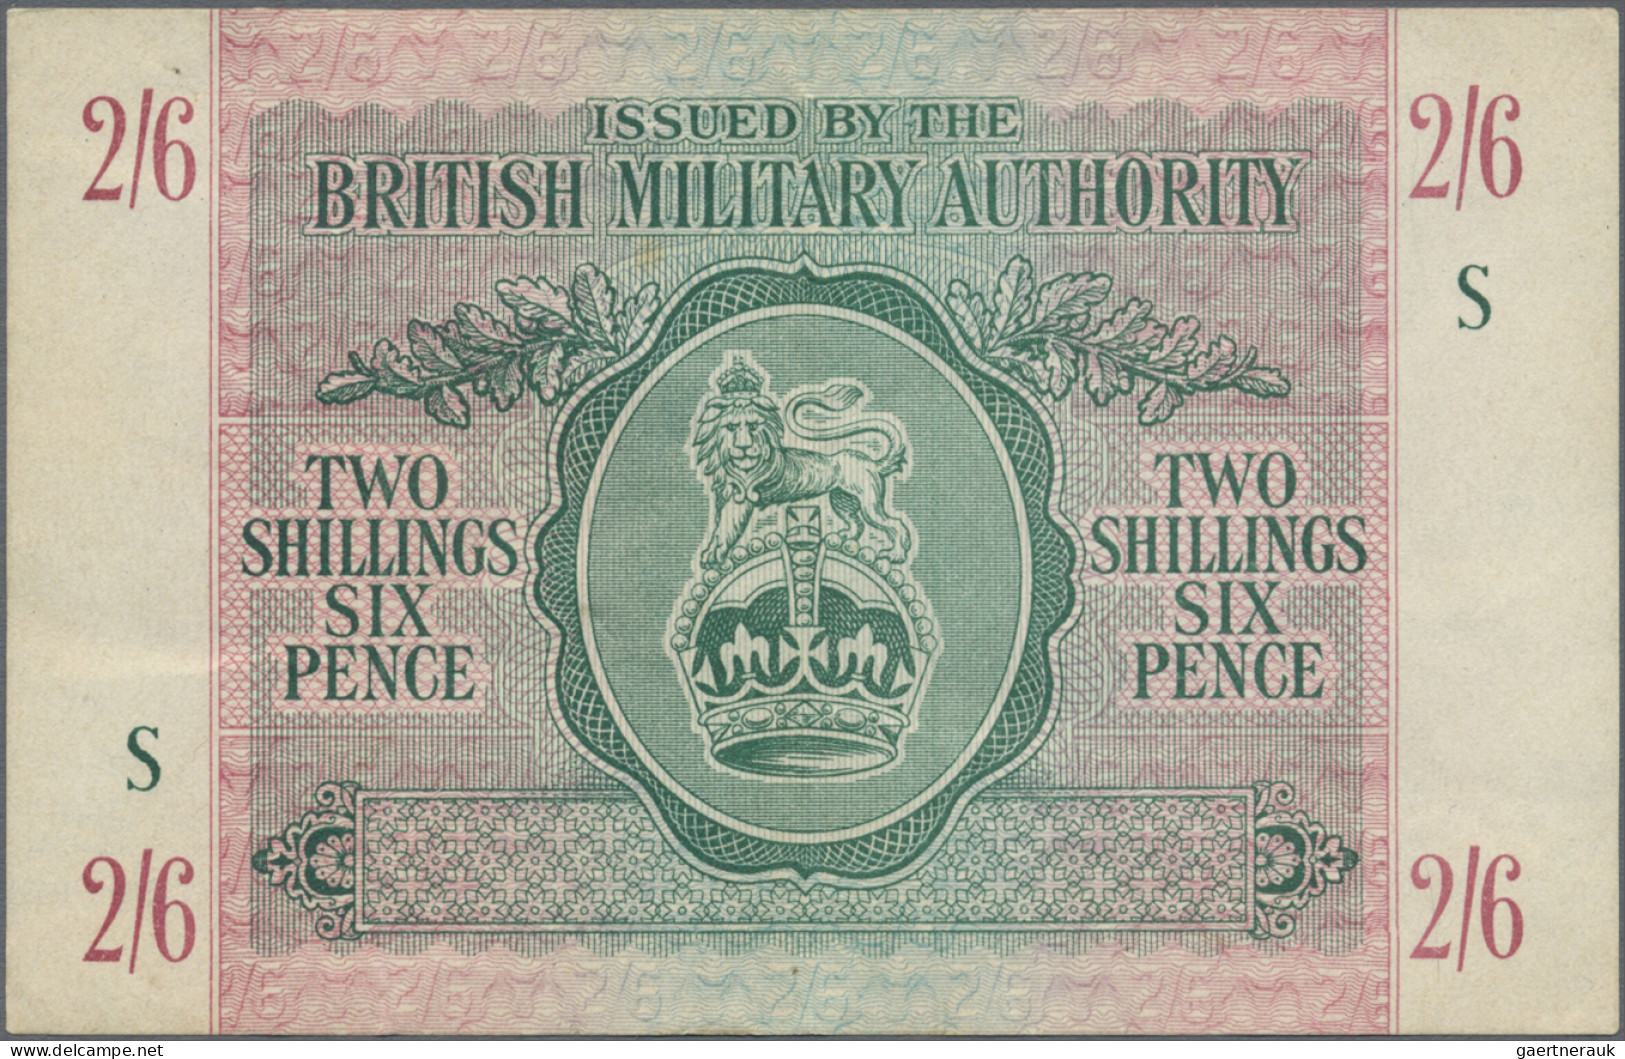 Great Britain: British Military Authority, lot with 6 banknotes, series 1943/44,